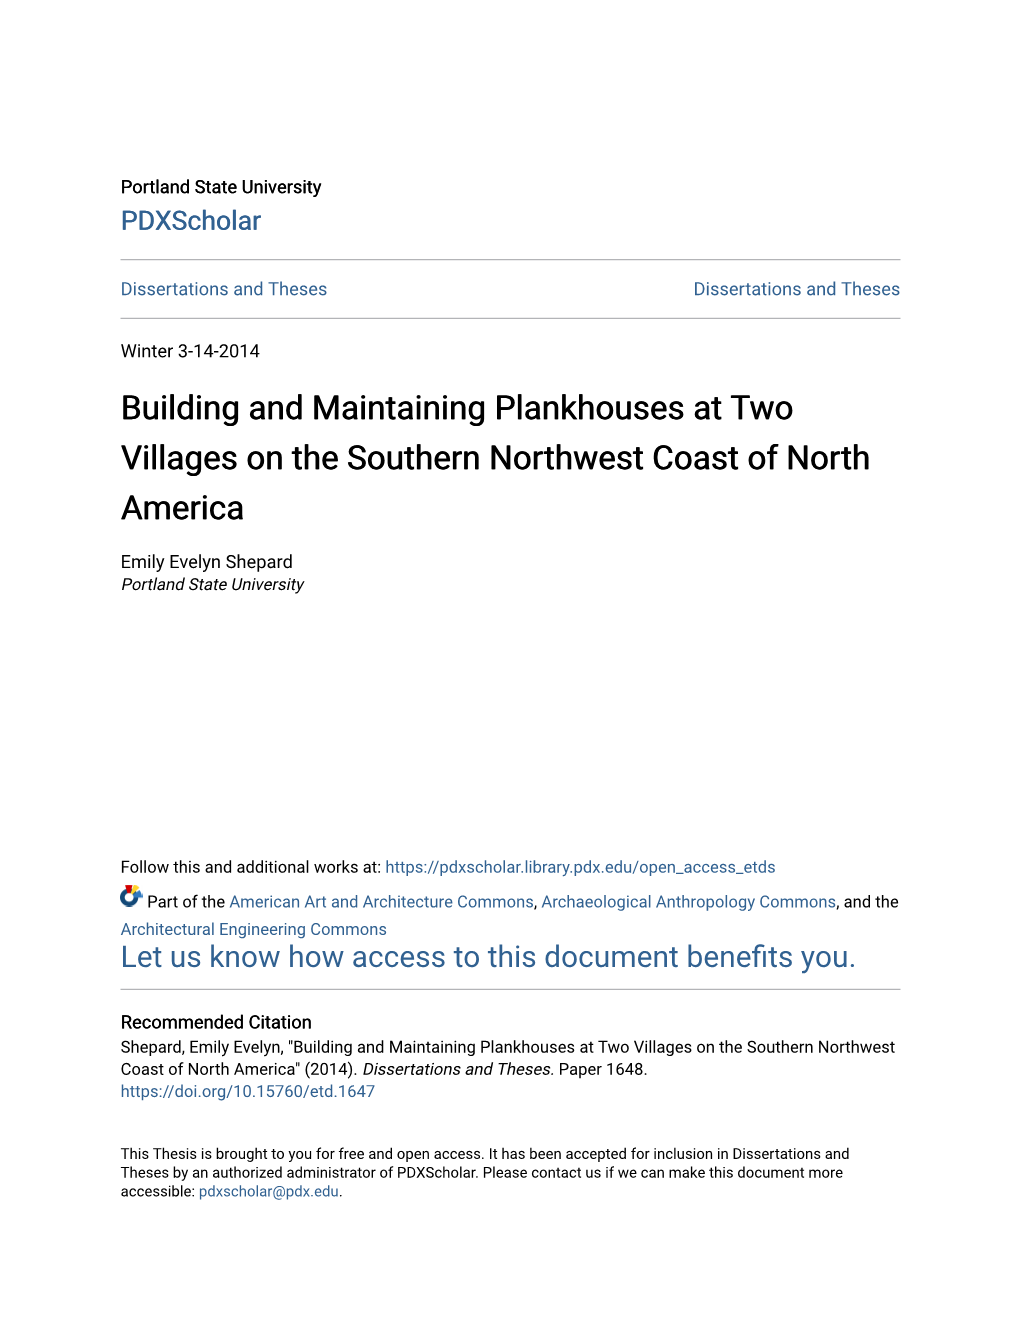 Building and Maintaining Plankhouses at Two Villages on the Southern Northwest Coast of North America